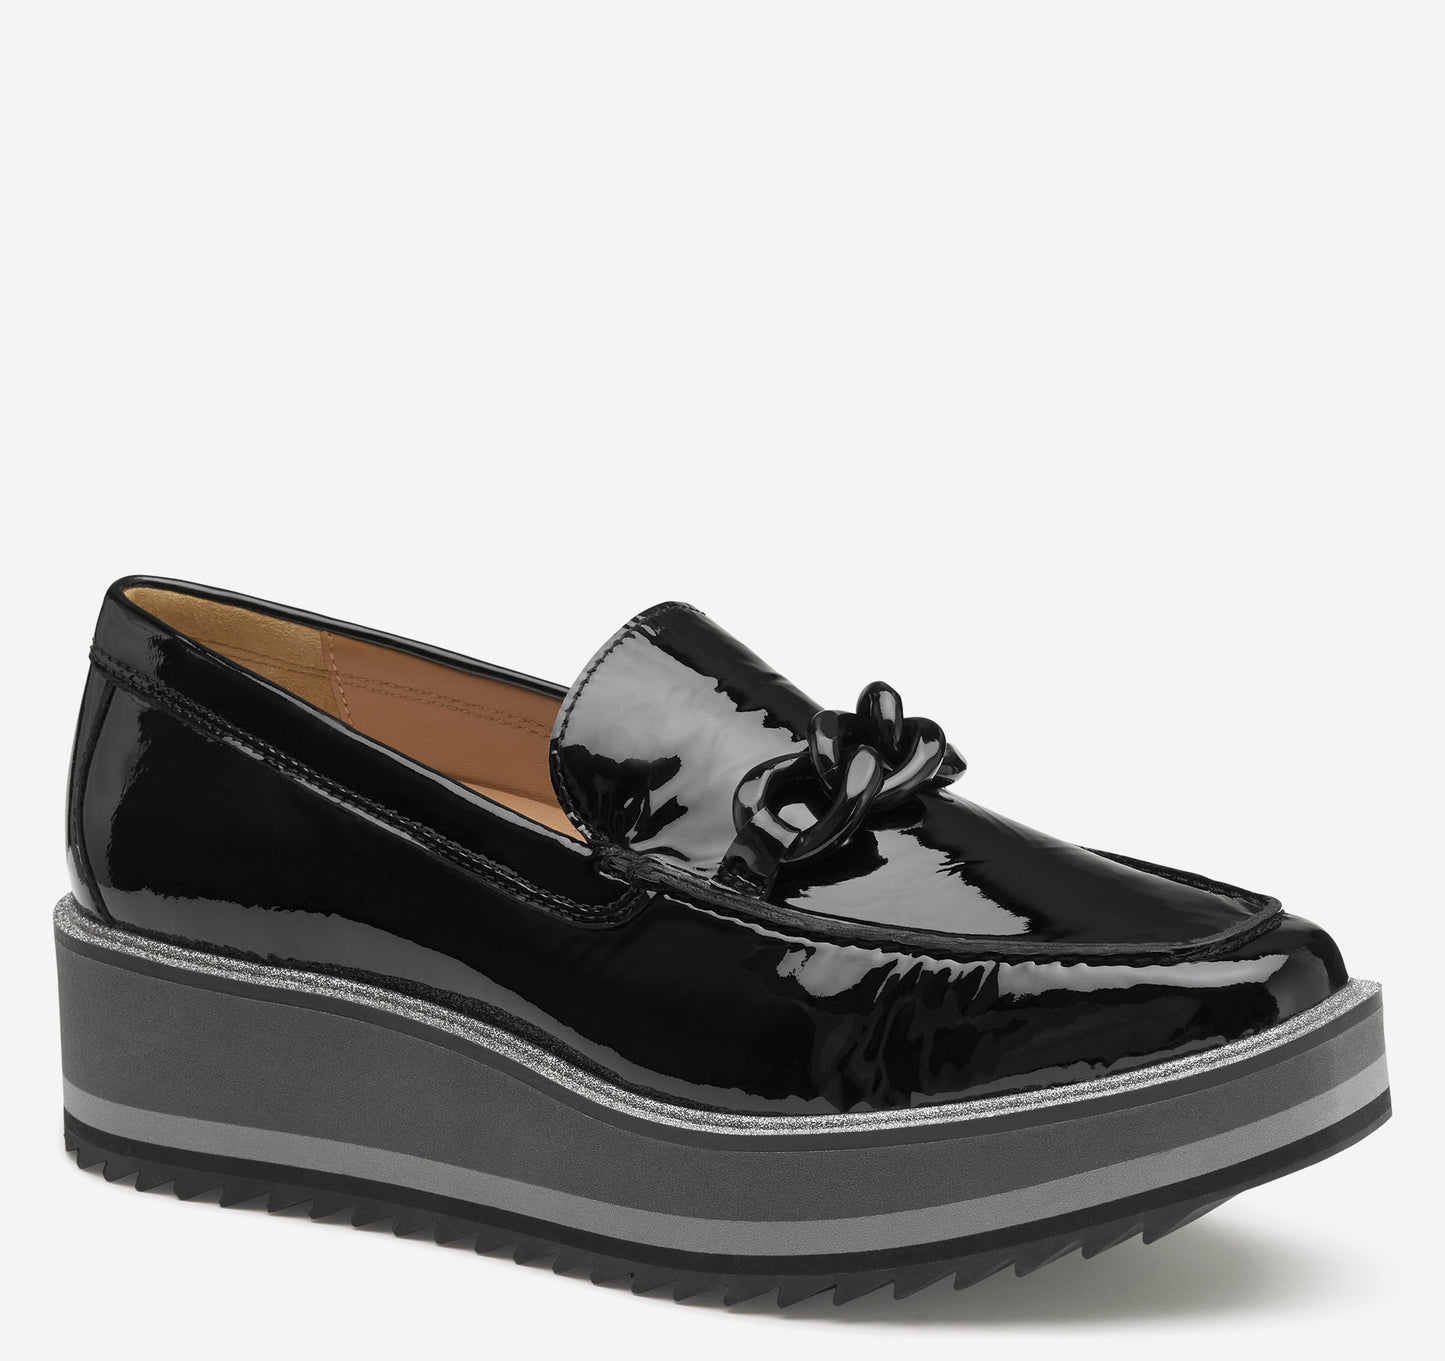 Womens Johnston & Murphy Gracelyn Chain Loafer in Black Patent Leather